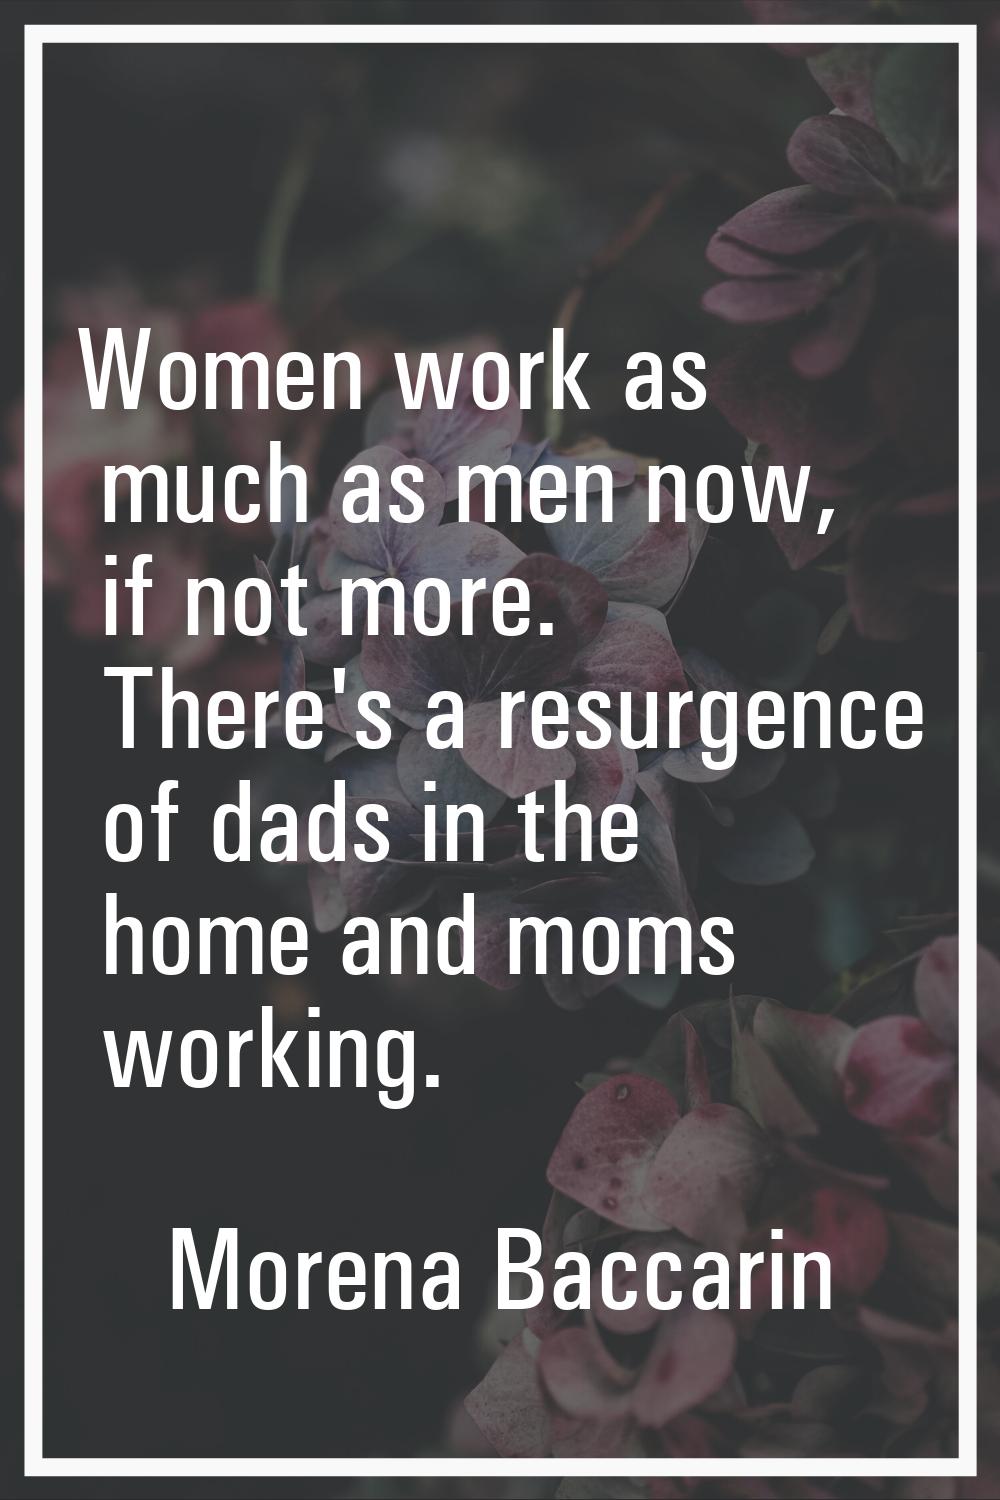 Women work as much as men now, if not more. There's a resurgence of dads in the home and moms worki